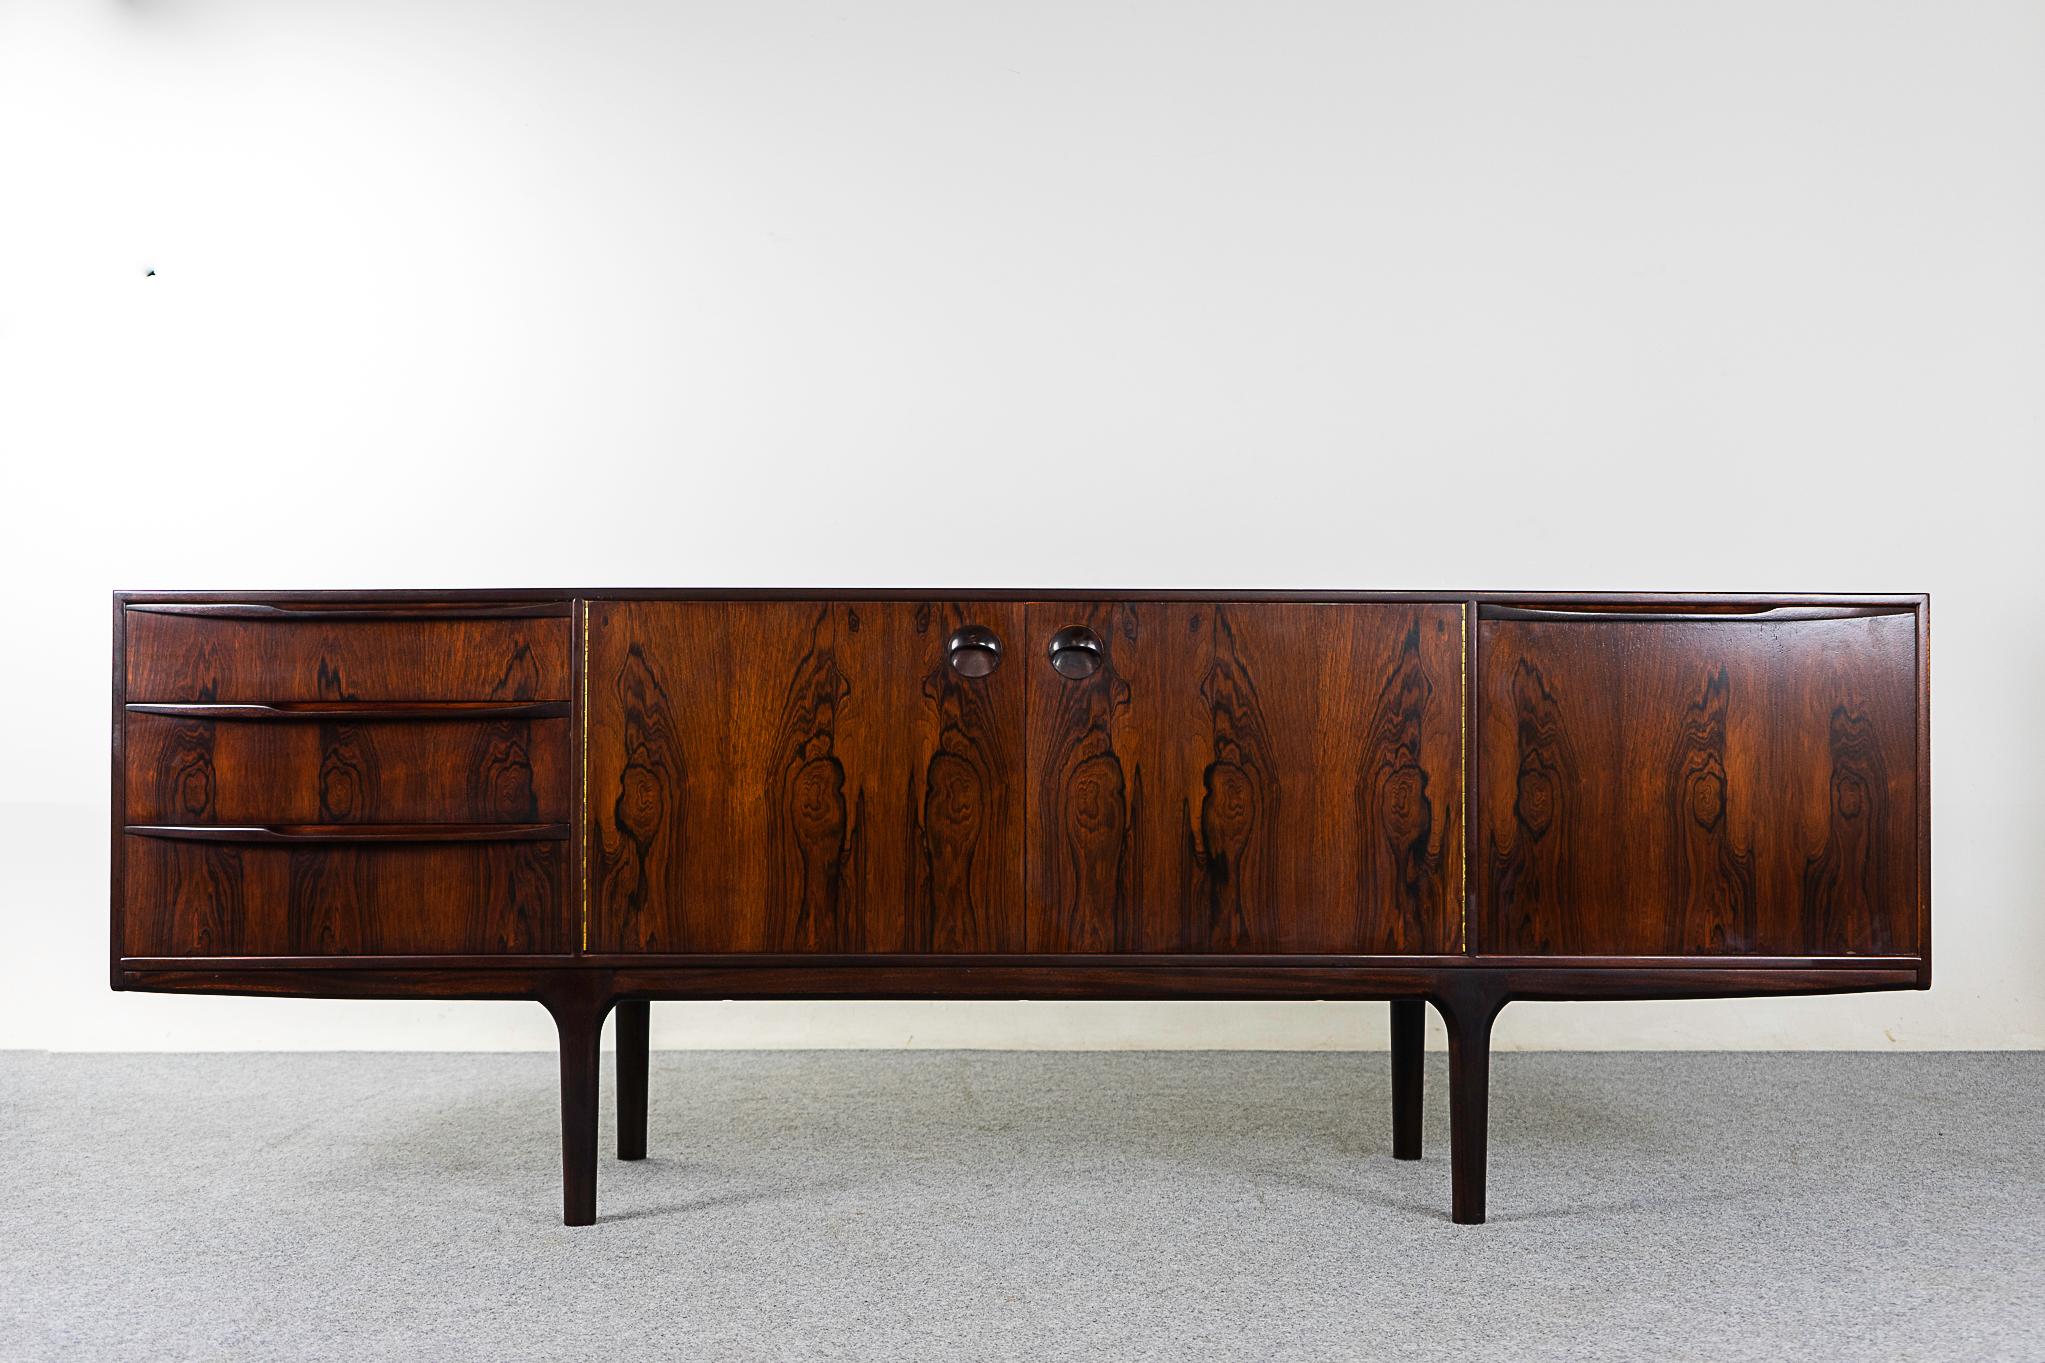 Rosewood sideboard by McIntosh, circa 1960's. Clean, simple lined design highlights the exceptional book-matched veneer. A combination of sliding doors, exterior drawers and a drop down front offers ample storage. McIntosh makers' mark intact.